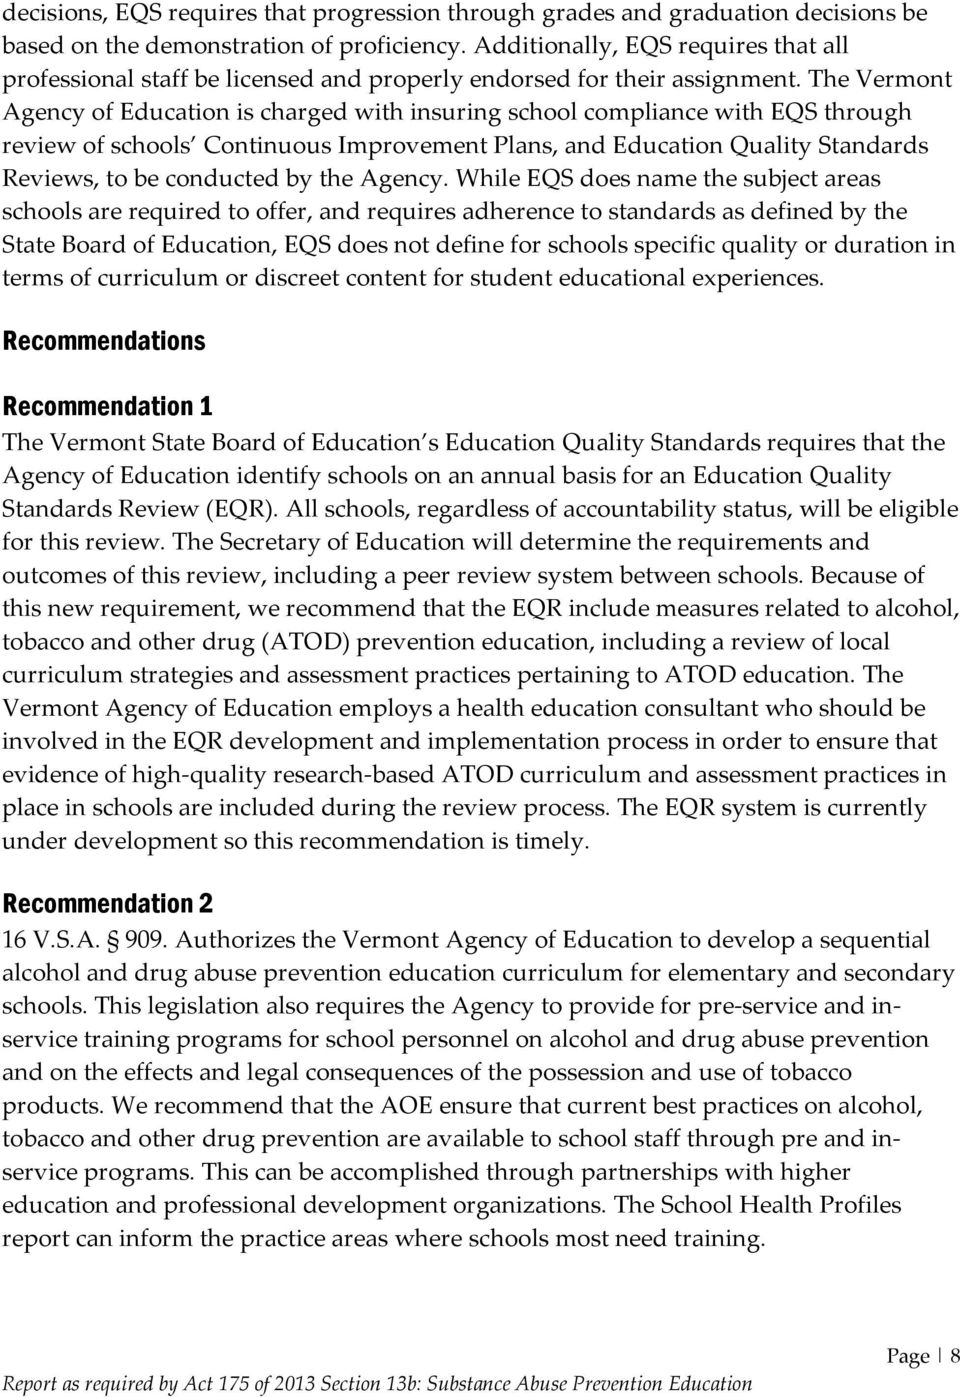 The Vermont Agency of Education is charged with insuring school compliance with EQS through review of schools Continuous Improvement Plans, and Education Quality Standards Reviews, to be conducted by